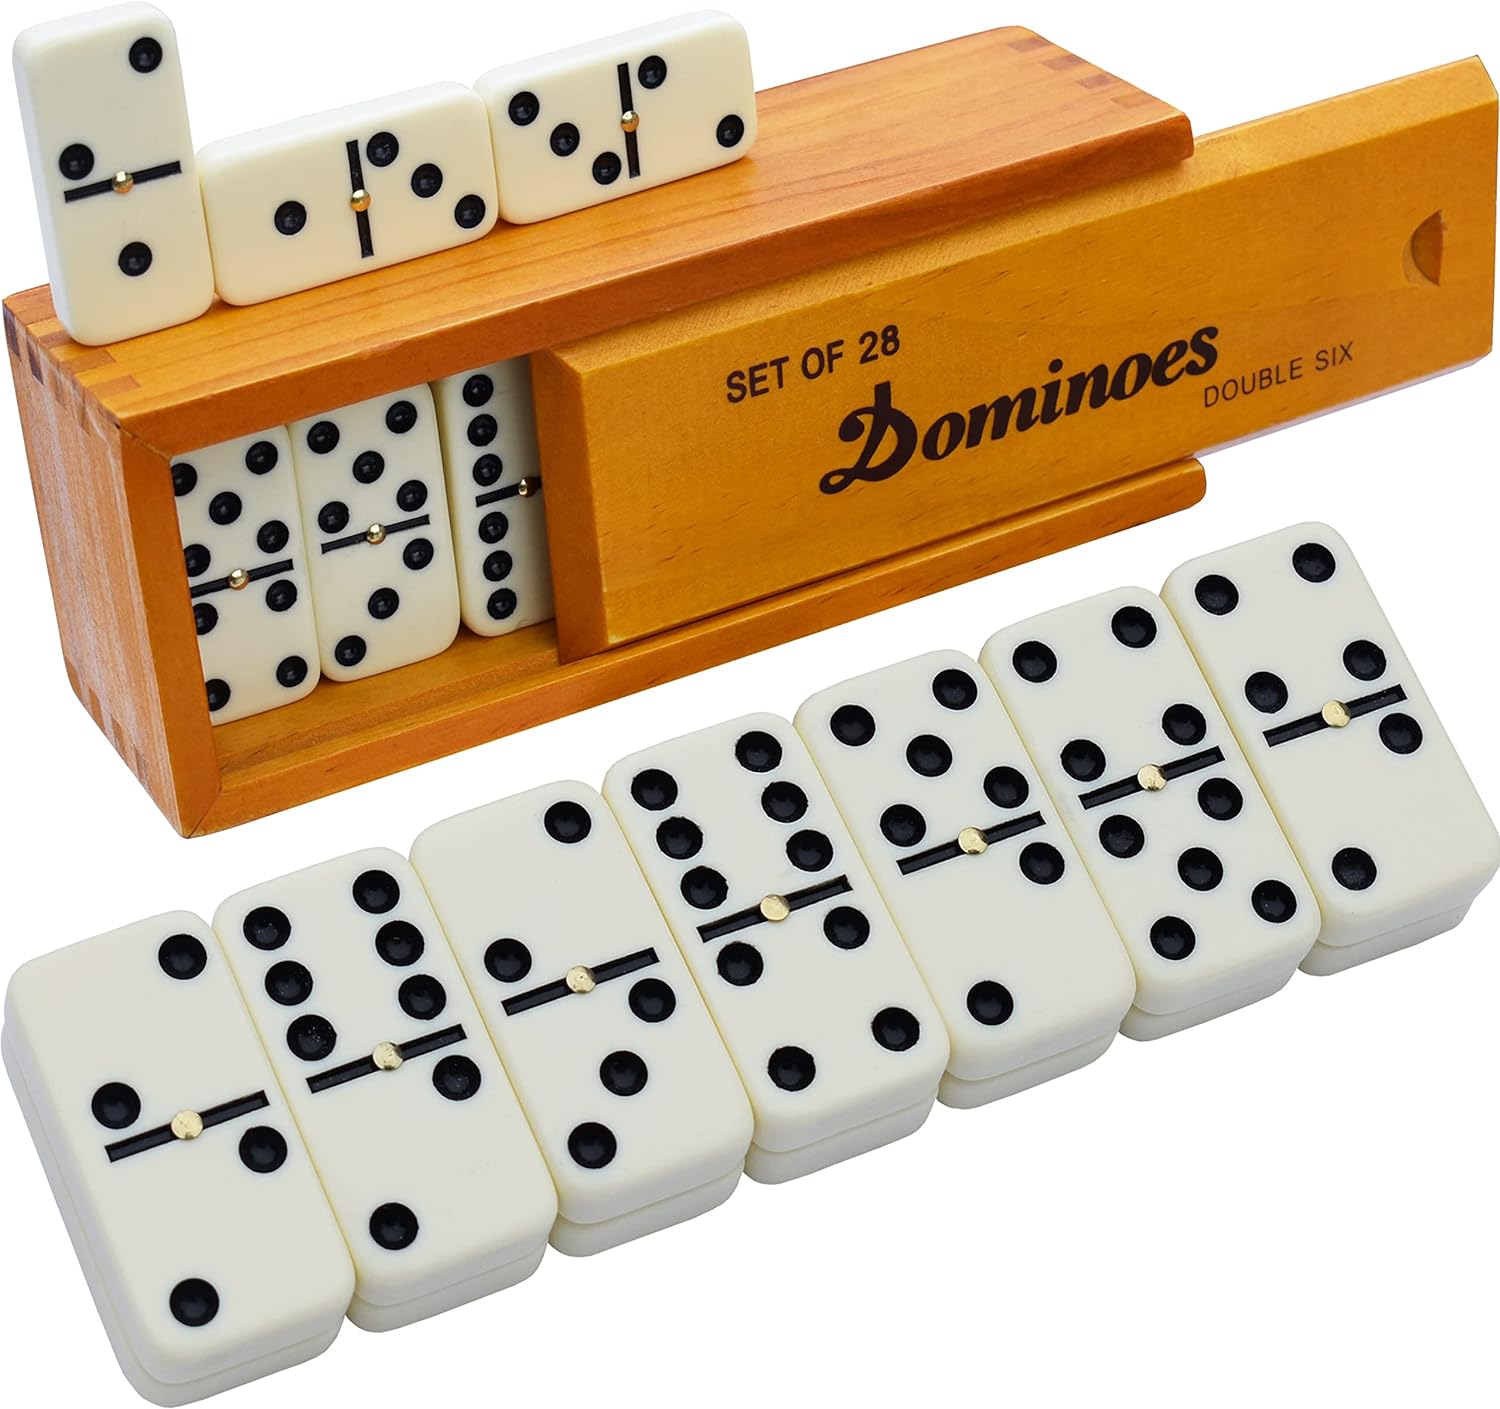 Wood Furphy Dominoes Set 28 Piece Domino Tiles Set Handcrafted Classic Numbers Table Game with Wooden Storage Case